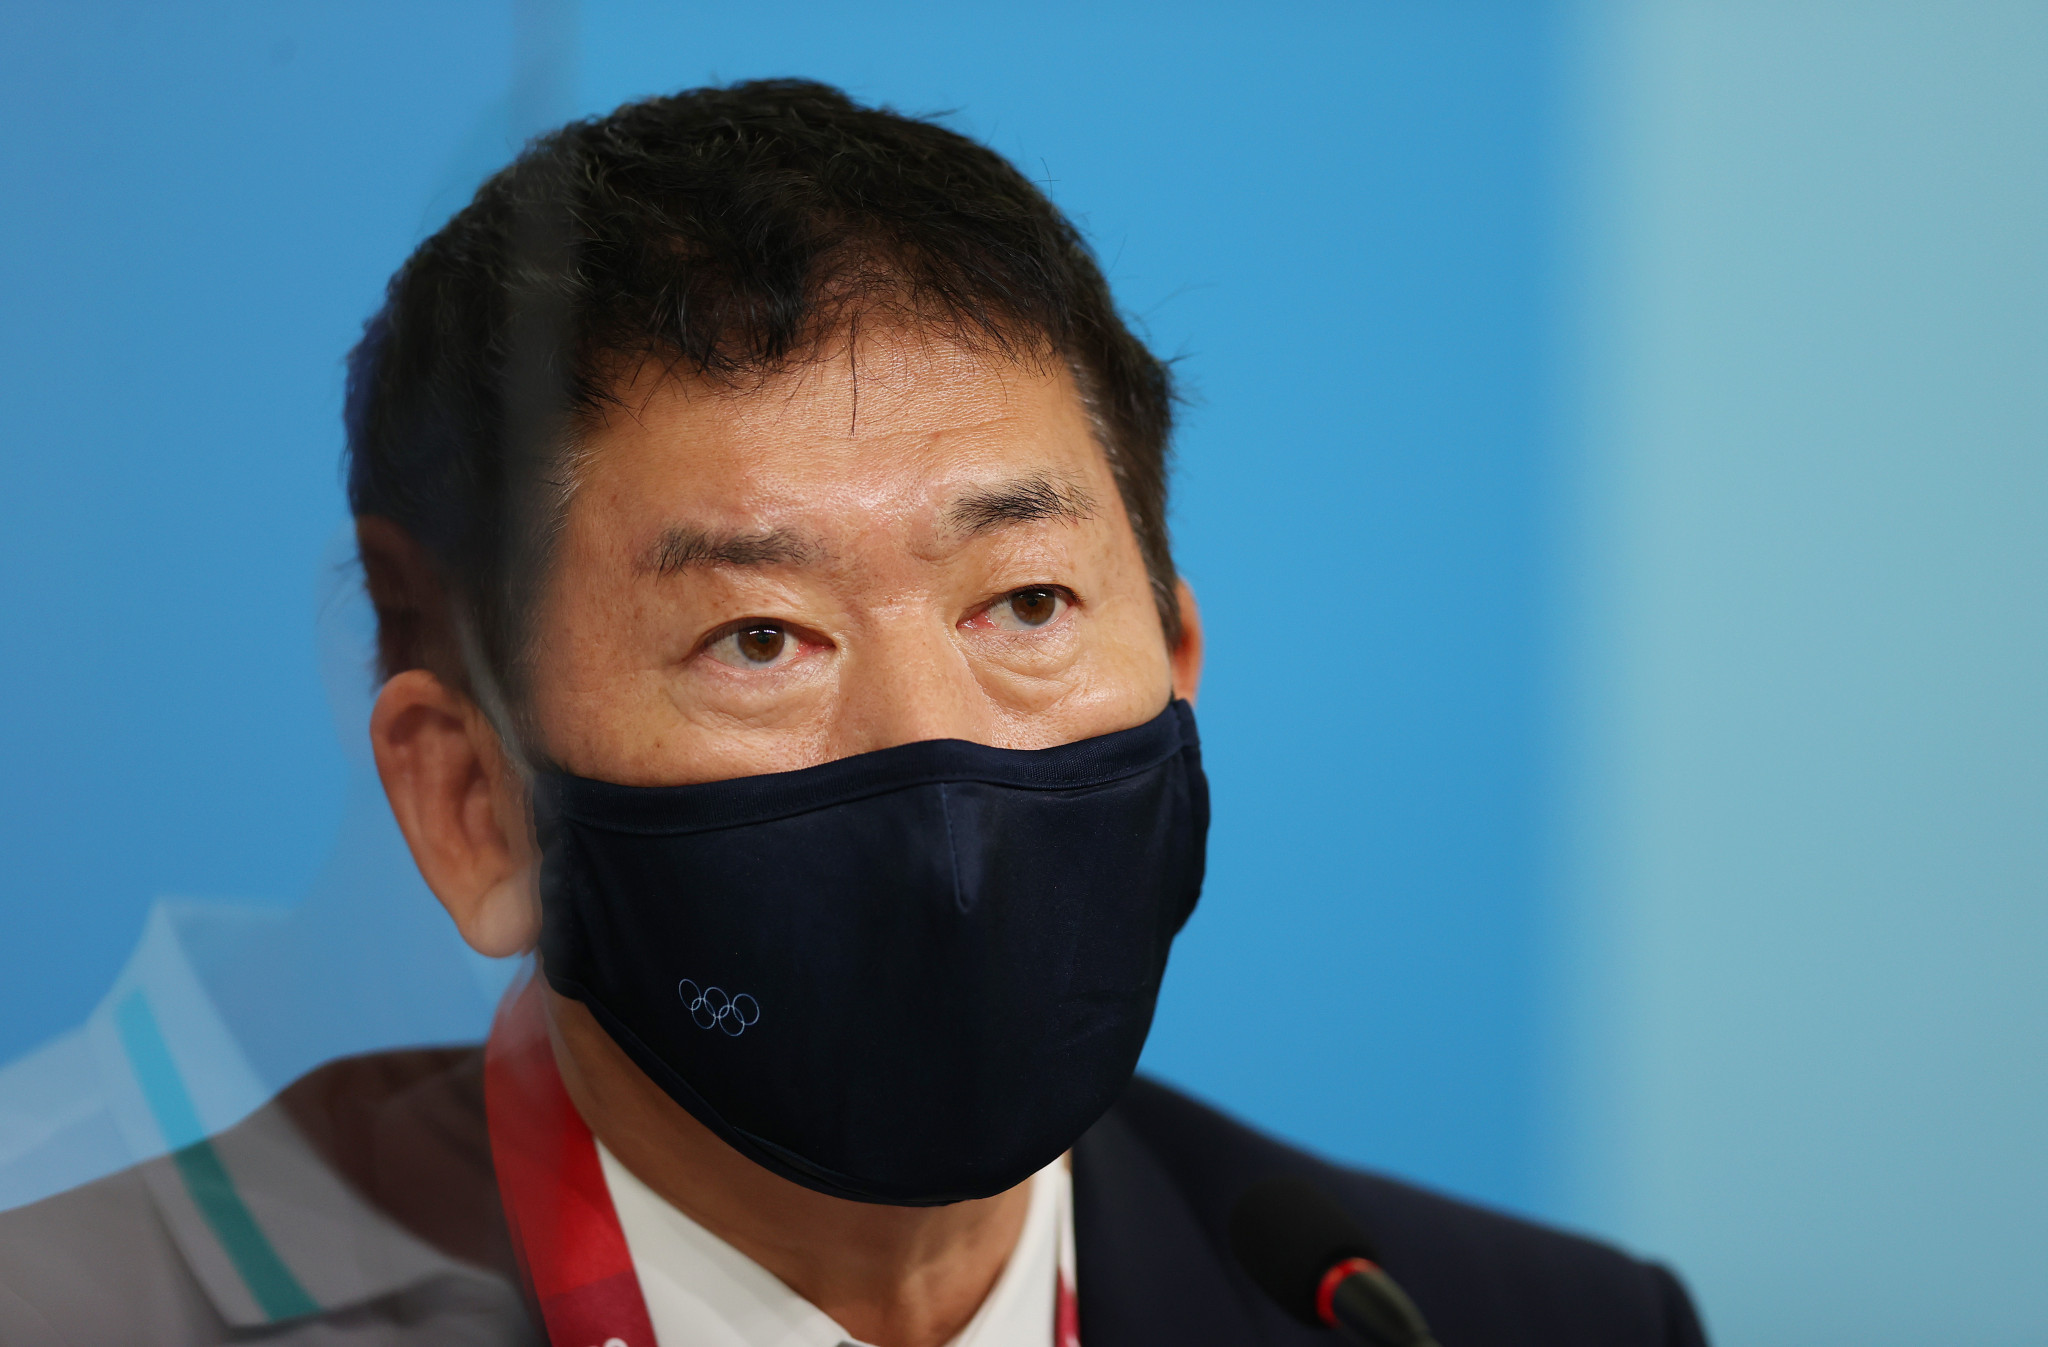 Morinari Watanabe is hoping to secure a second term as FIG President ©Getty Images